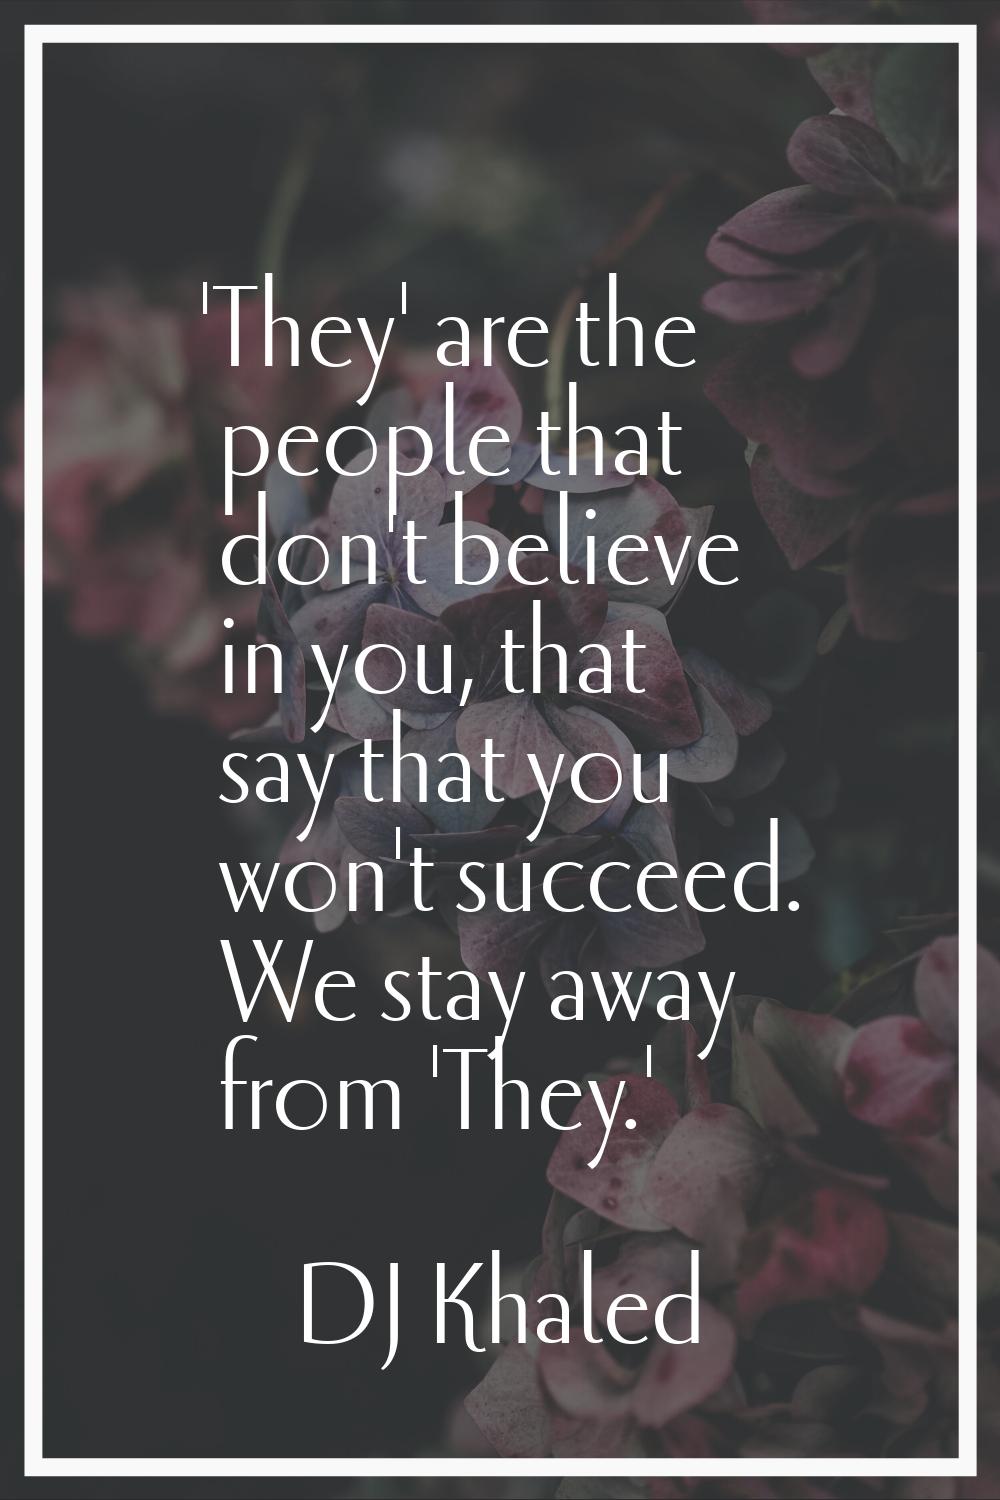 'They' are the people that don't believe in you, that say that you won't succeed. We stay away from